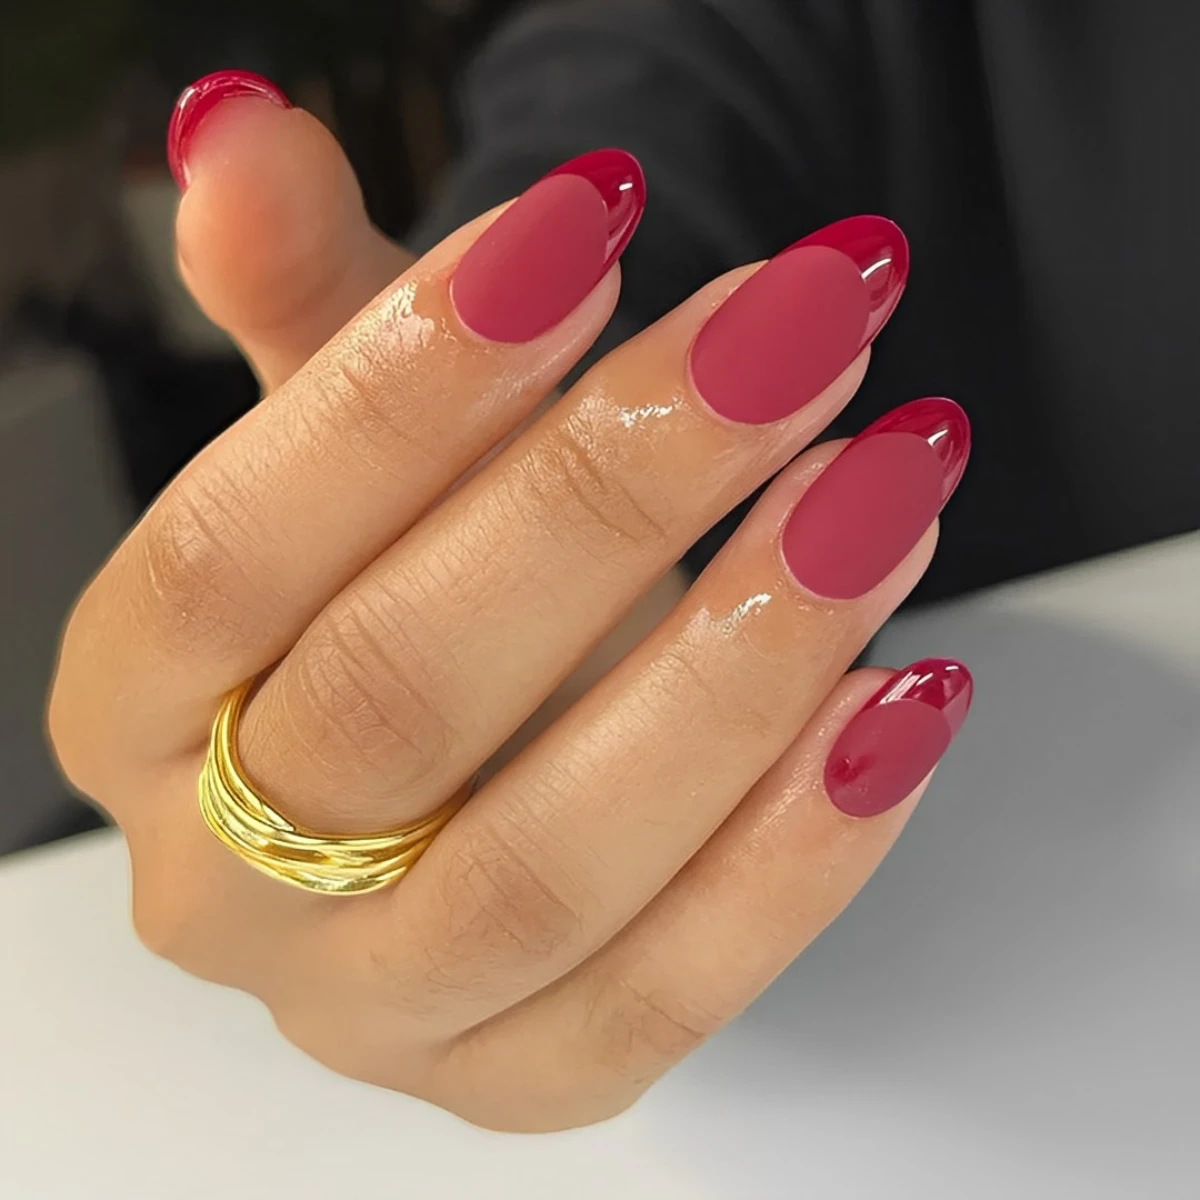 1680979176 942 These are the nail polish trends for summer 2023 that.webp - These are the nail polish trends for summer 2023 that are IN!